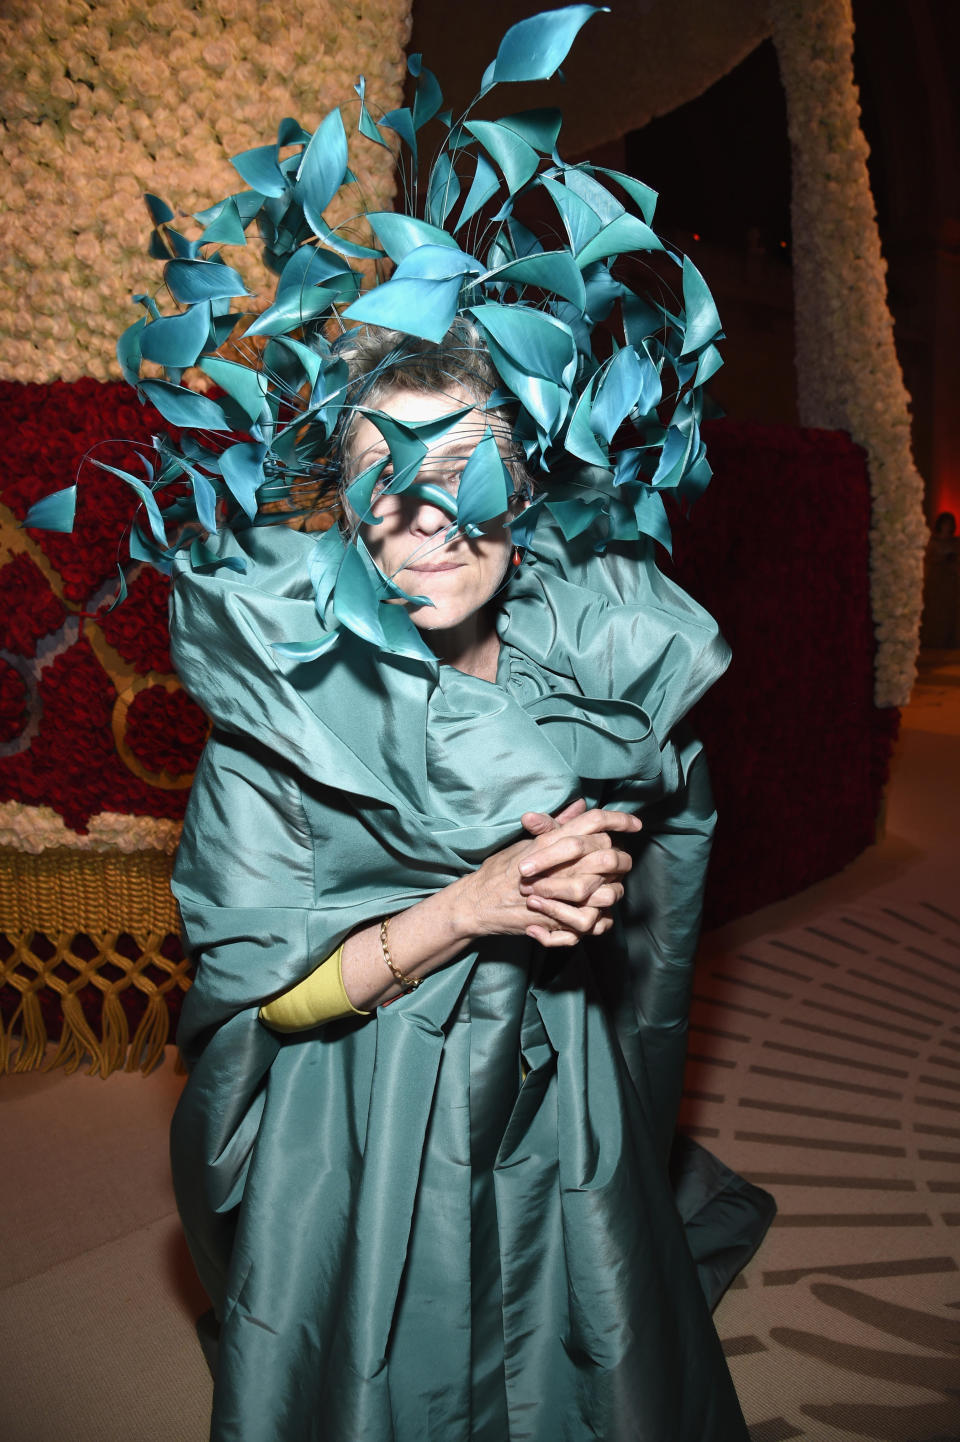 Frances McDormand attends the Heavenly Bodies: Fashion & The Catholic Imagination Costume Institute Gala at The Metropolitan Museum of Art on May 7, 2018 in New York City.  / Credit: Kevin Mazur/MG18/Getty Images for The Met Museum/Vogue